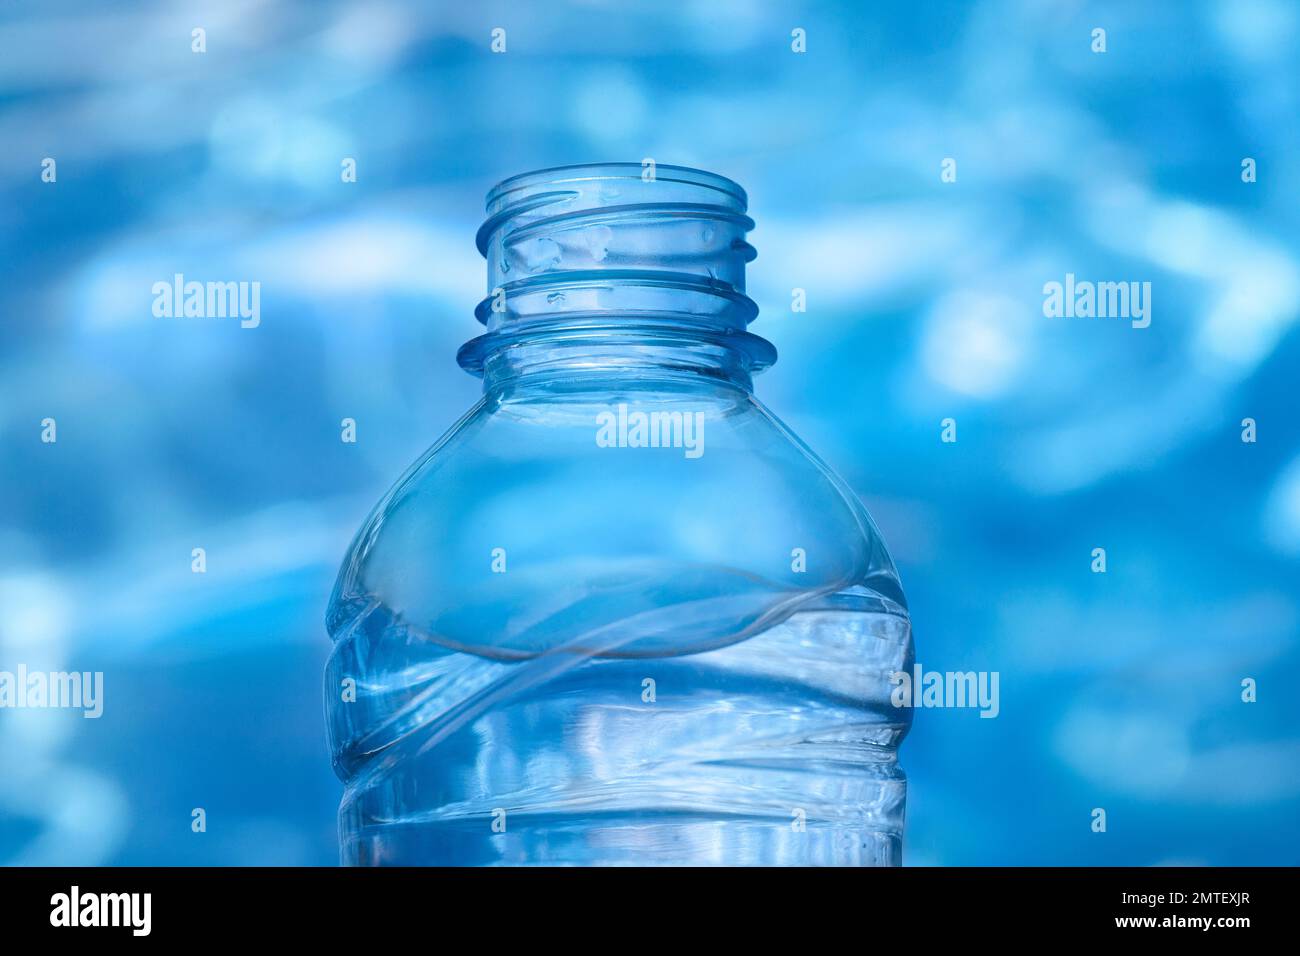 Close up view of plastic bottle full of water against blue color water background with light reflections Stock Photo